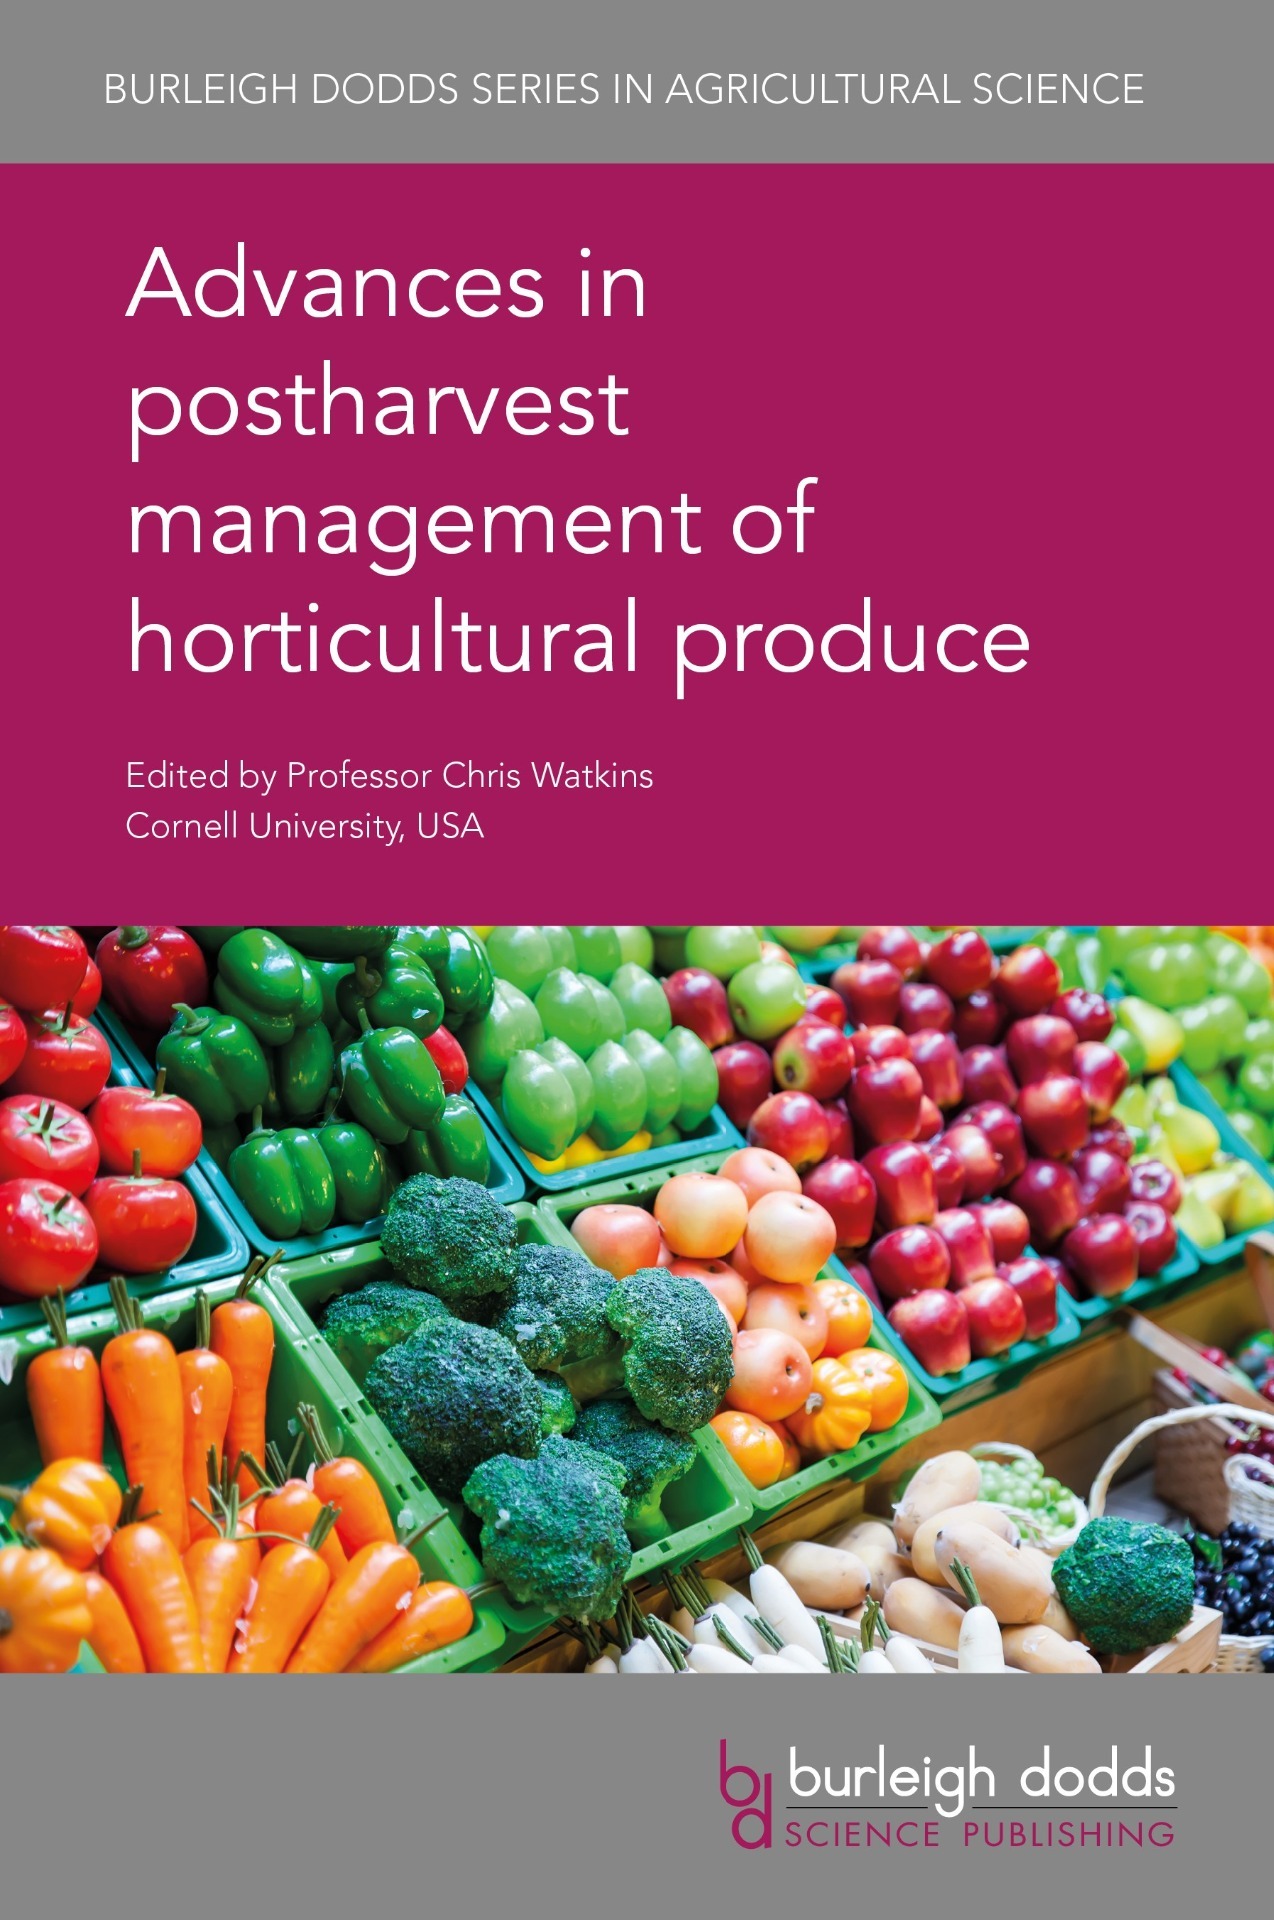 Advances in postharvest management of horticultural produce